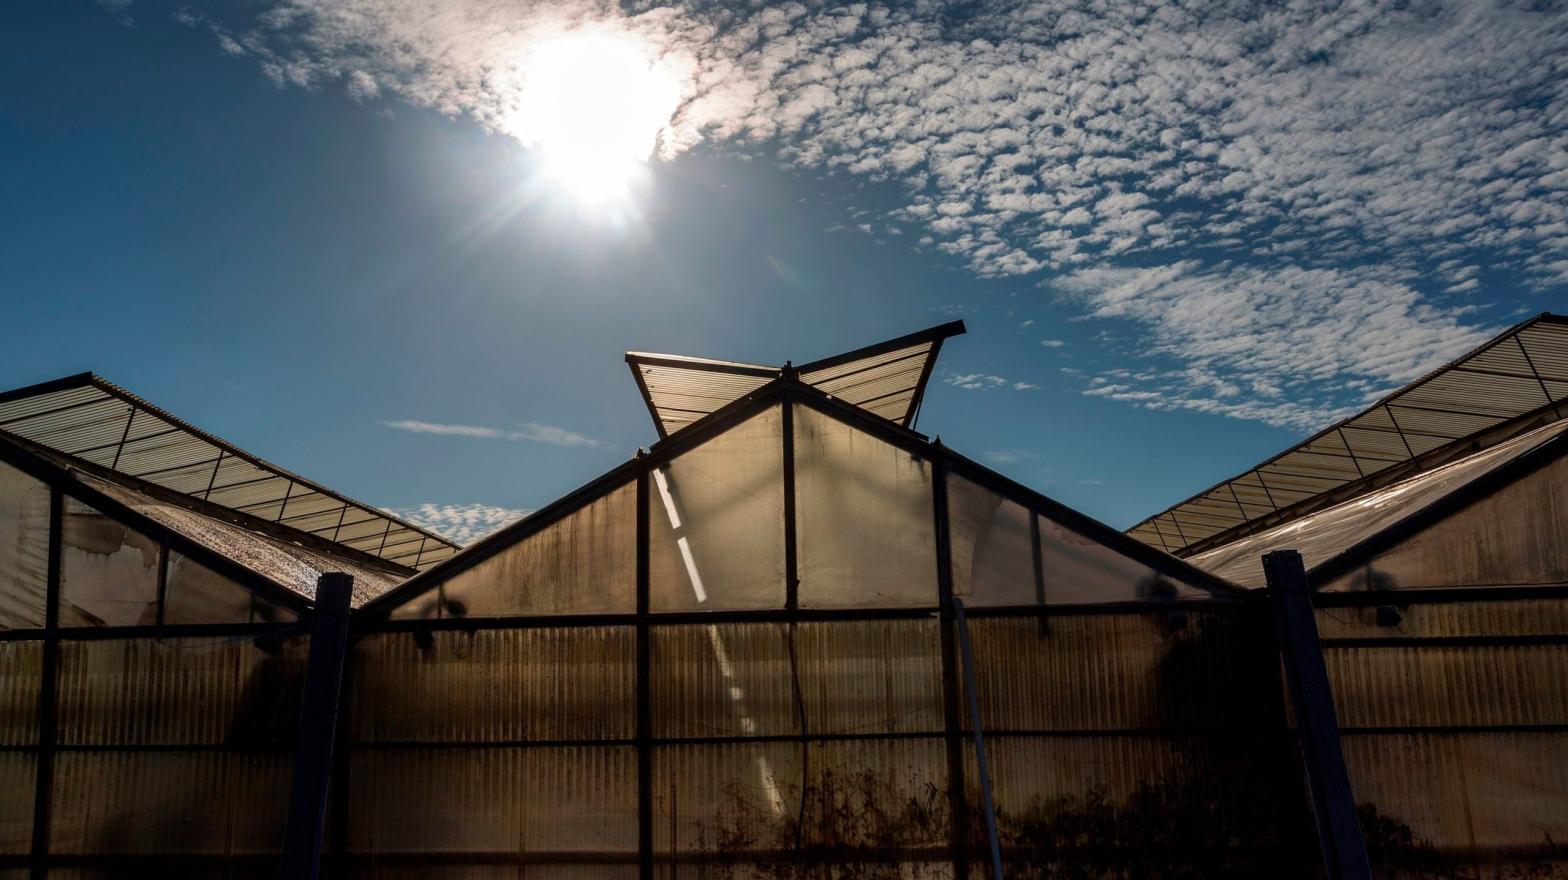 Here are some cannabis greenhouses near Santa Barbara, California on August 6, 2019. Imagine a future where all your weed is grown in tandem with solar energy generation. (Photo: David McNew, Getty Images)